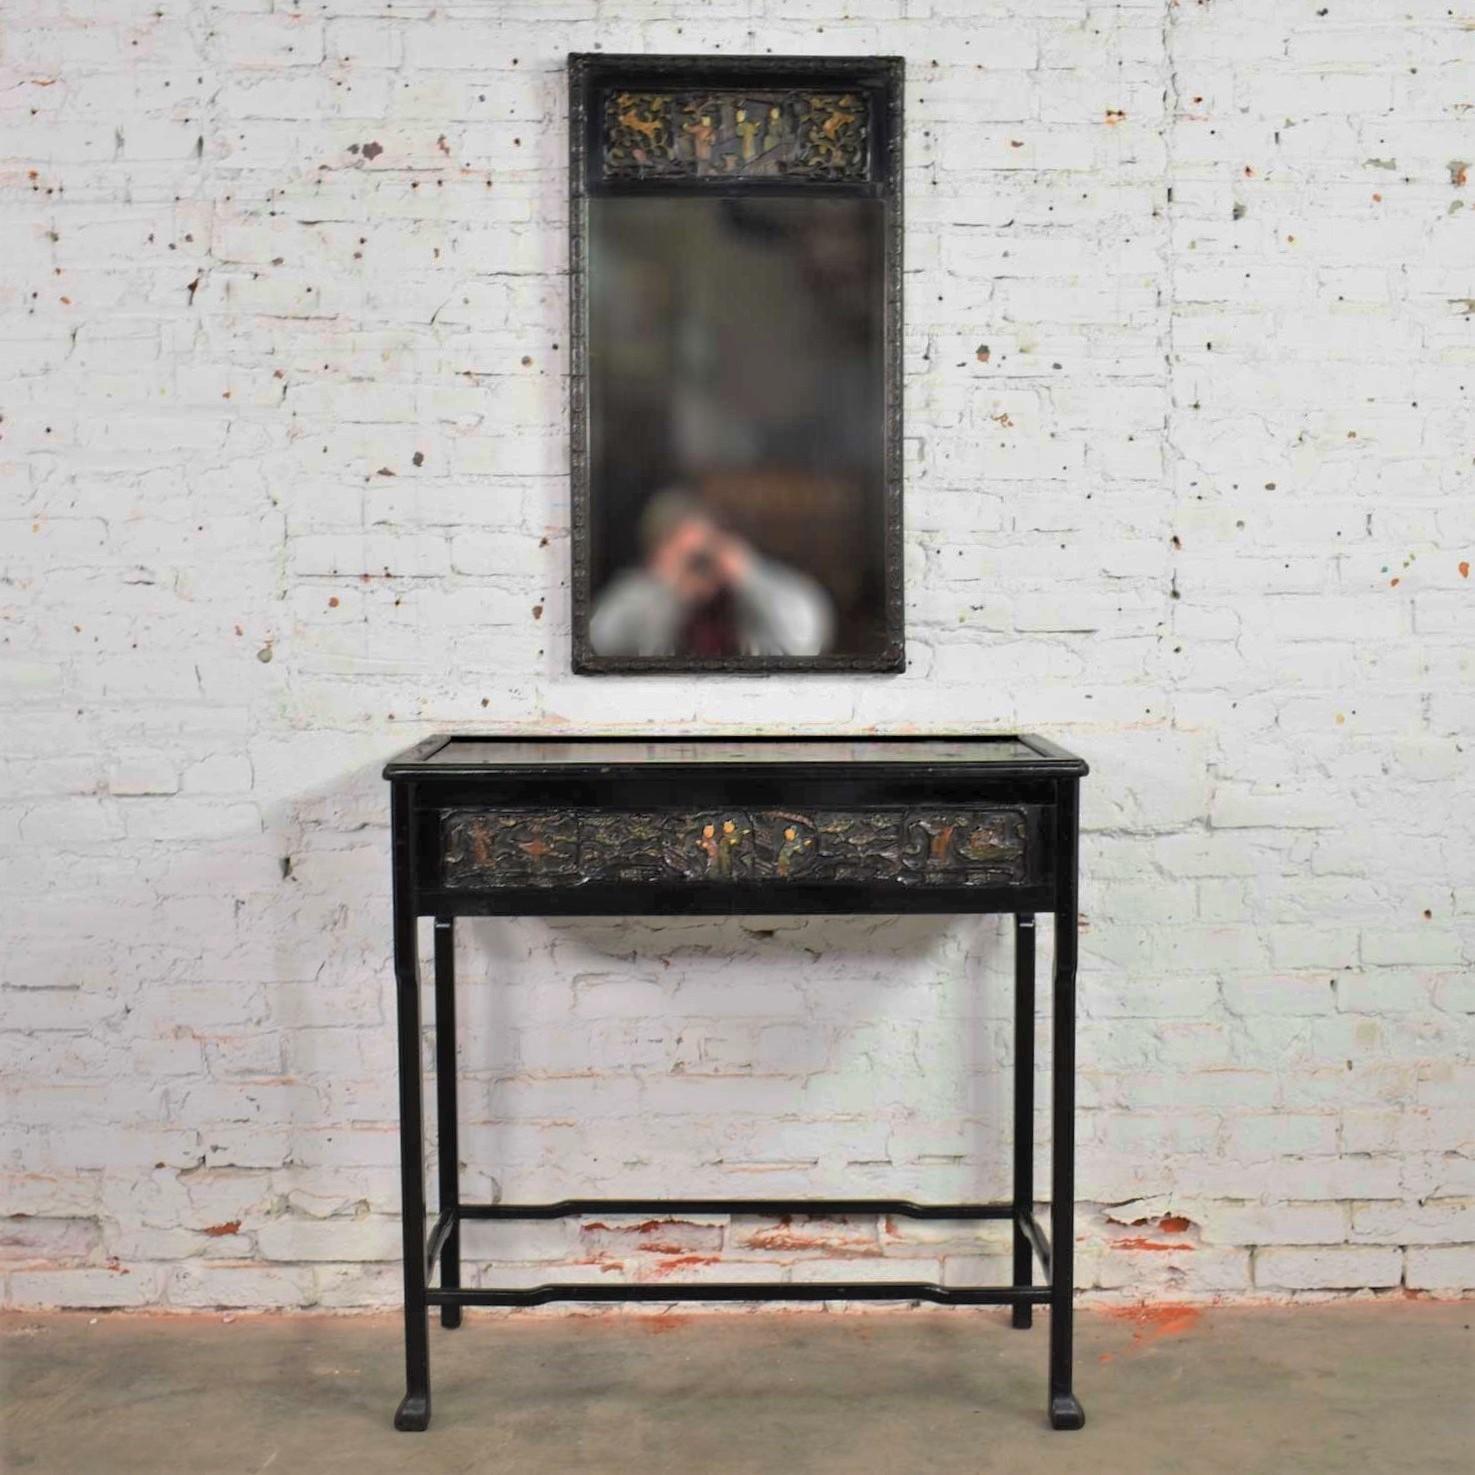 Handsome antique Asian black lacquered console table and matching mirror with exceptional deep hand carved lacquer details of Asian figures and florals. Some painted colors and some black. Both are in wonderful antique condition. There are small